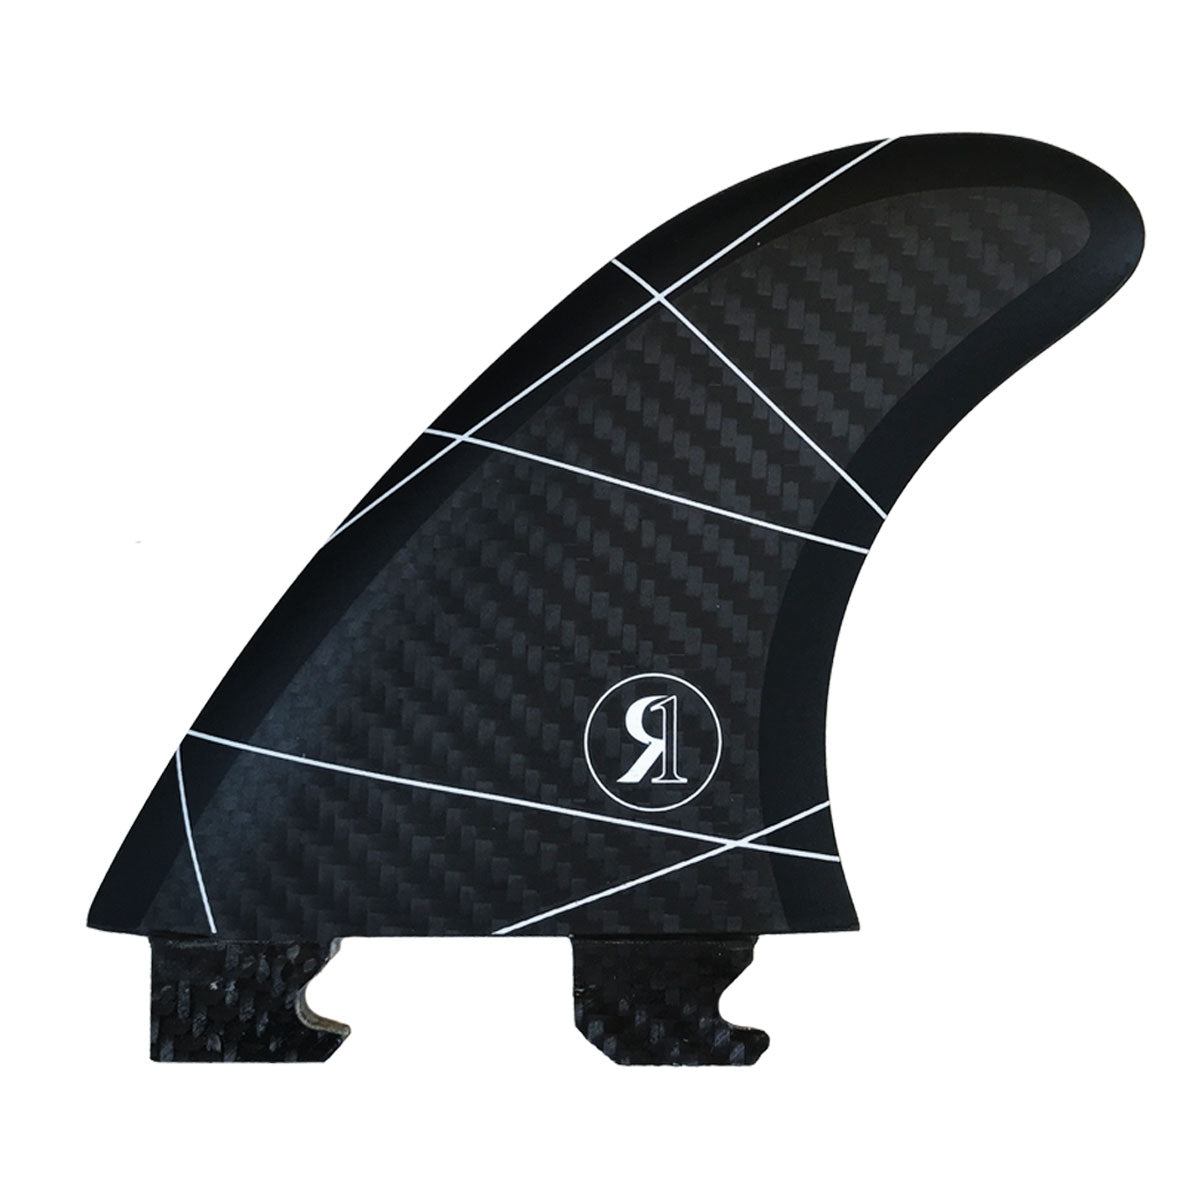 A lightweight, strong Ronix Floating Fin-S 2.0 Tool-Less Fiberglass constructed center fin with a logo on it.